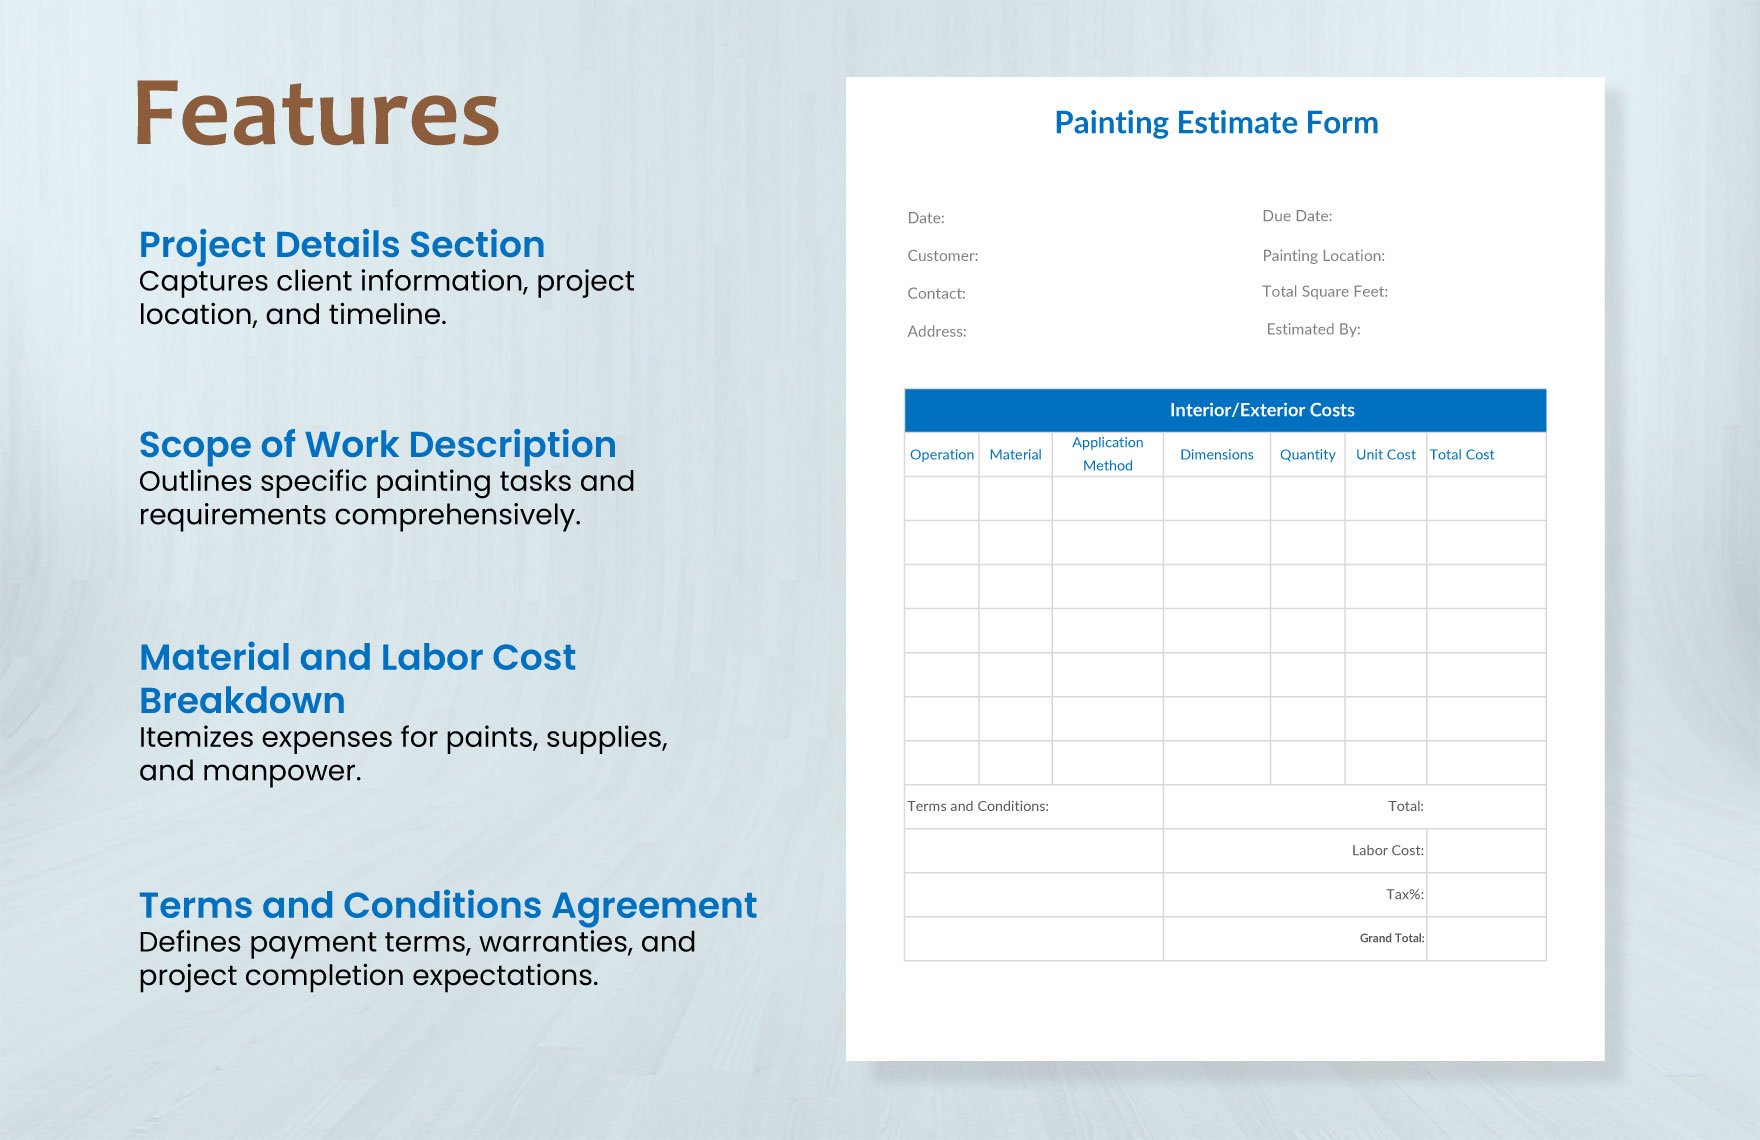 Painting Estimate Form Template